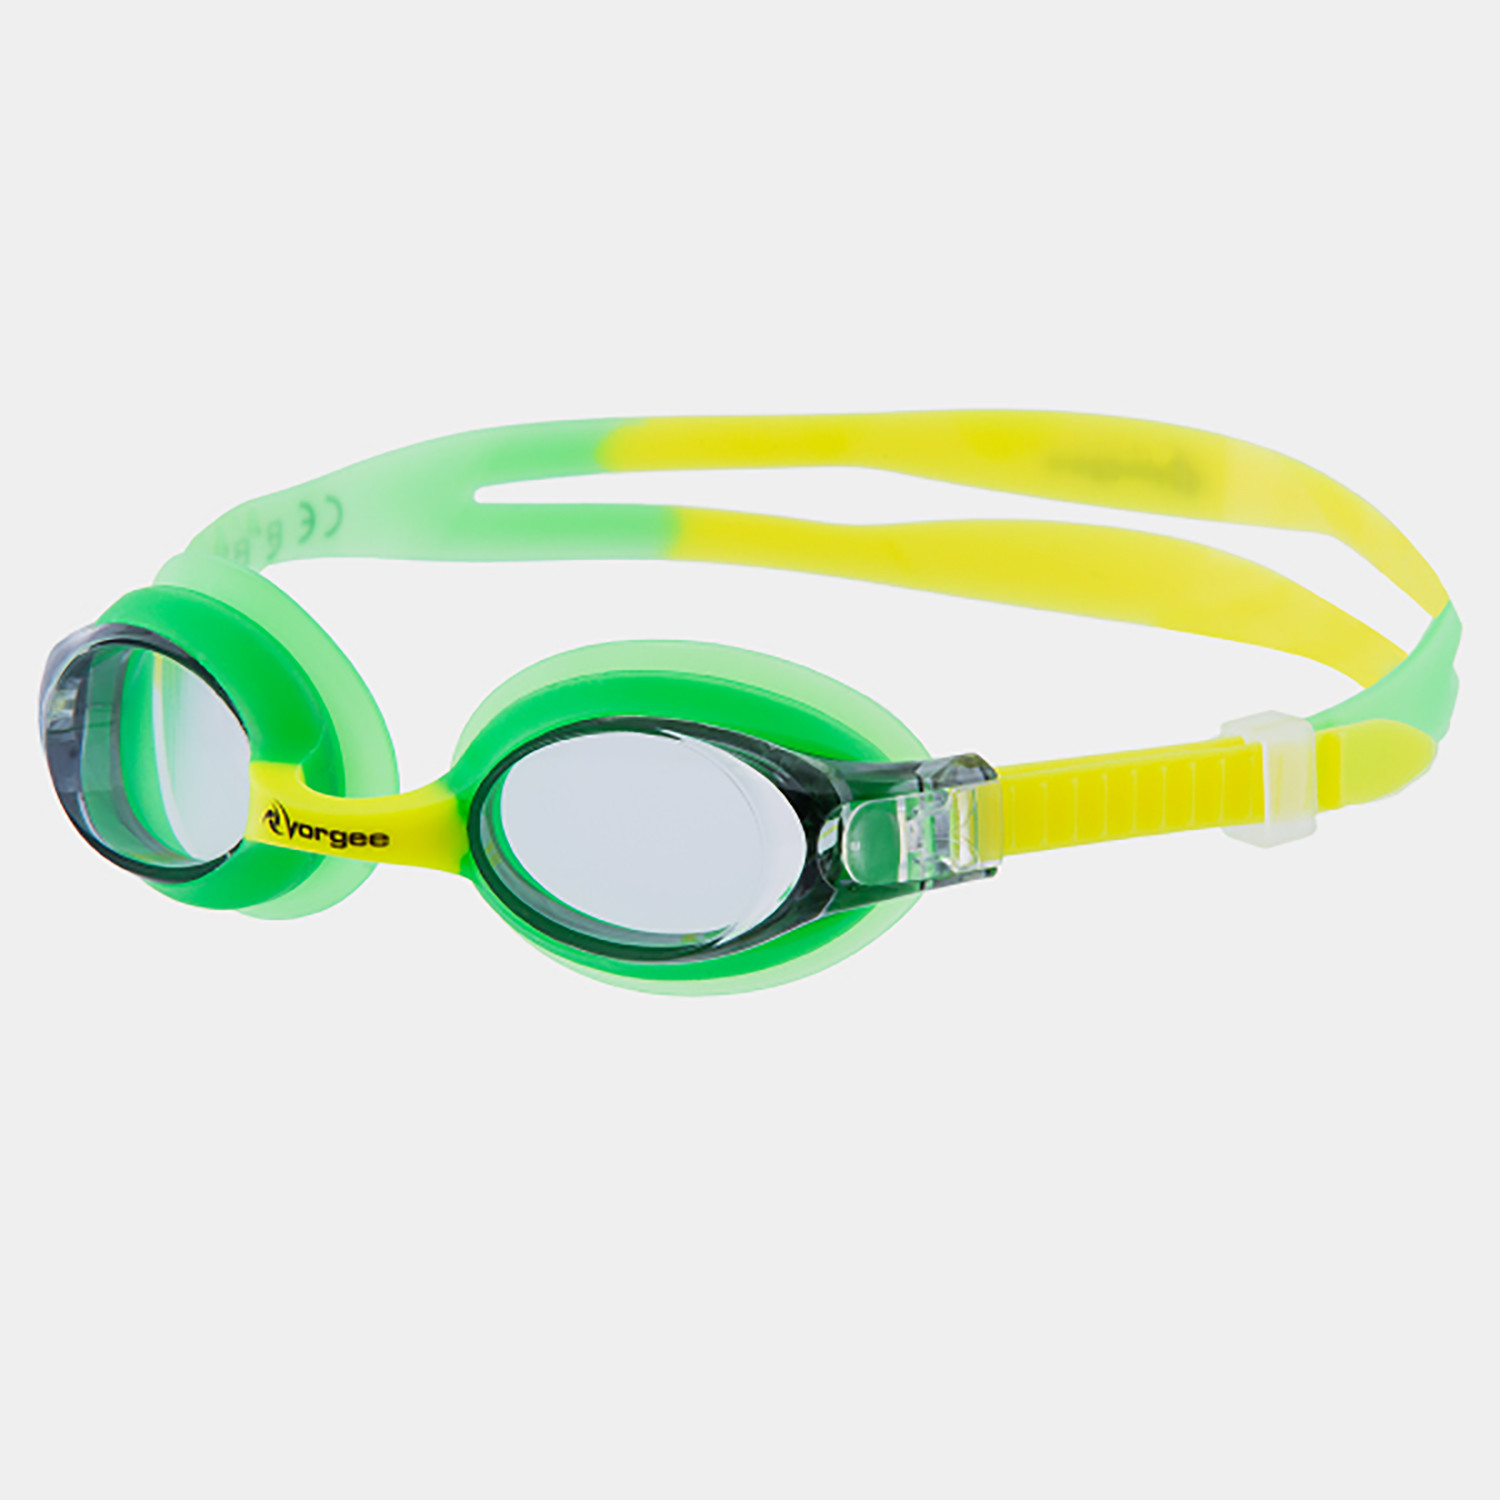 Vorgee Dolphin Junior Tinted Goggles (9000053567_453)